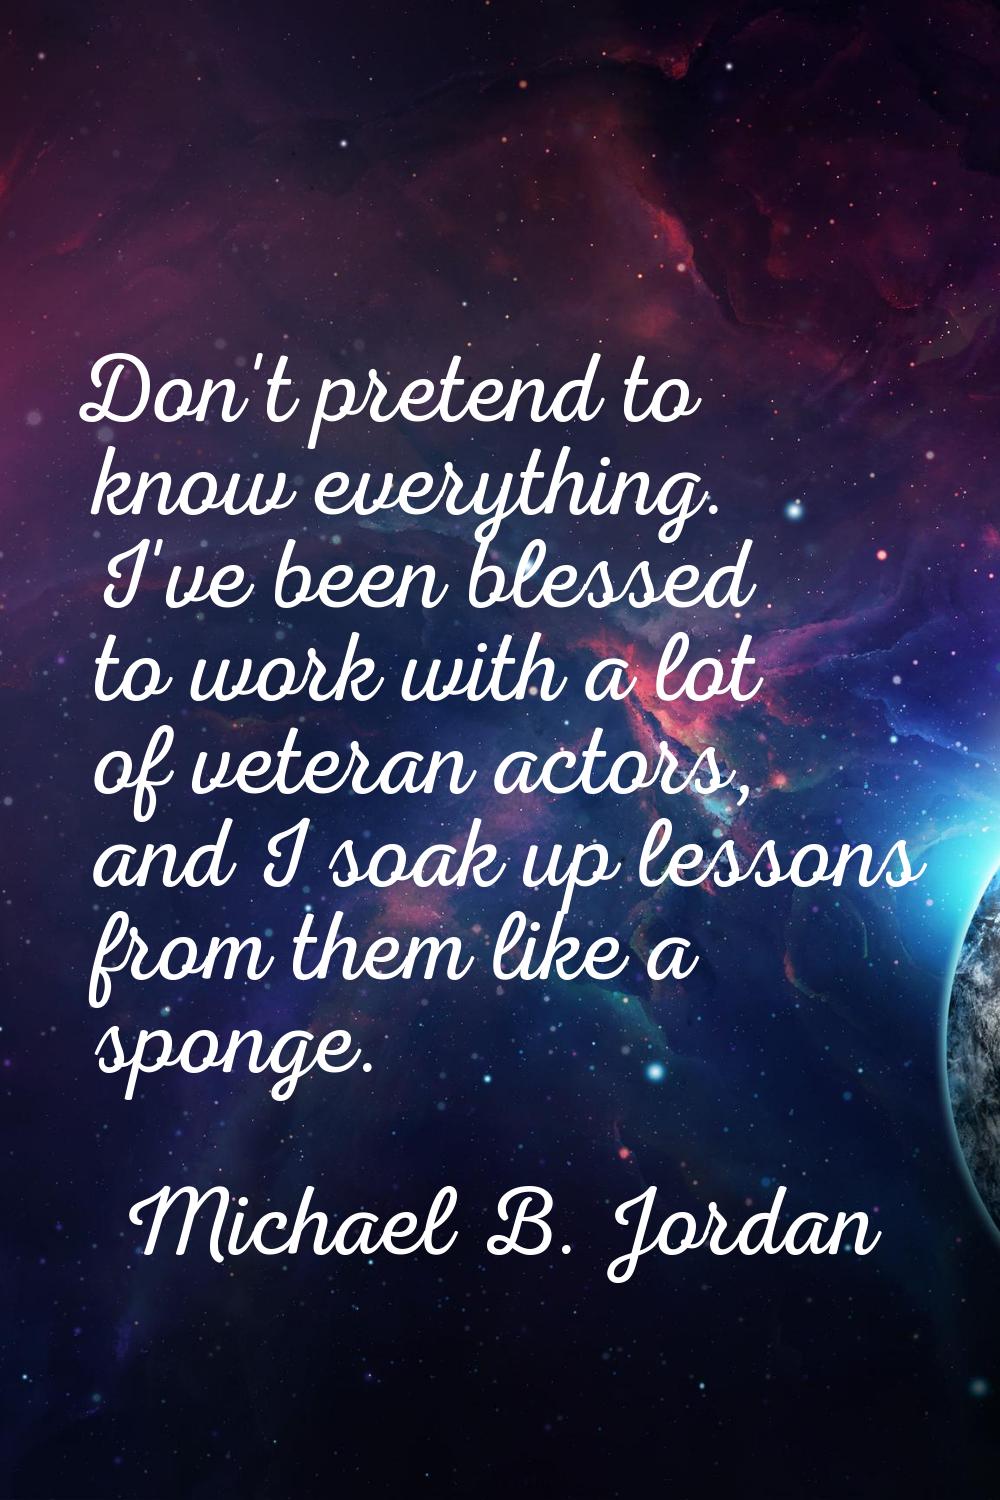 Don't pretend to know everything. I've been blessed to work with a lot of veteran actors, and I soa